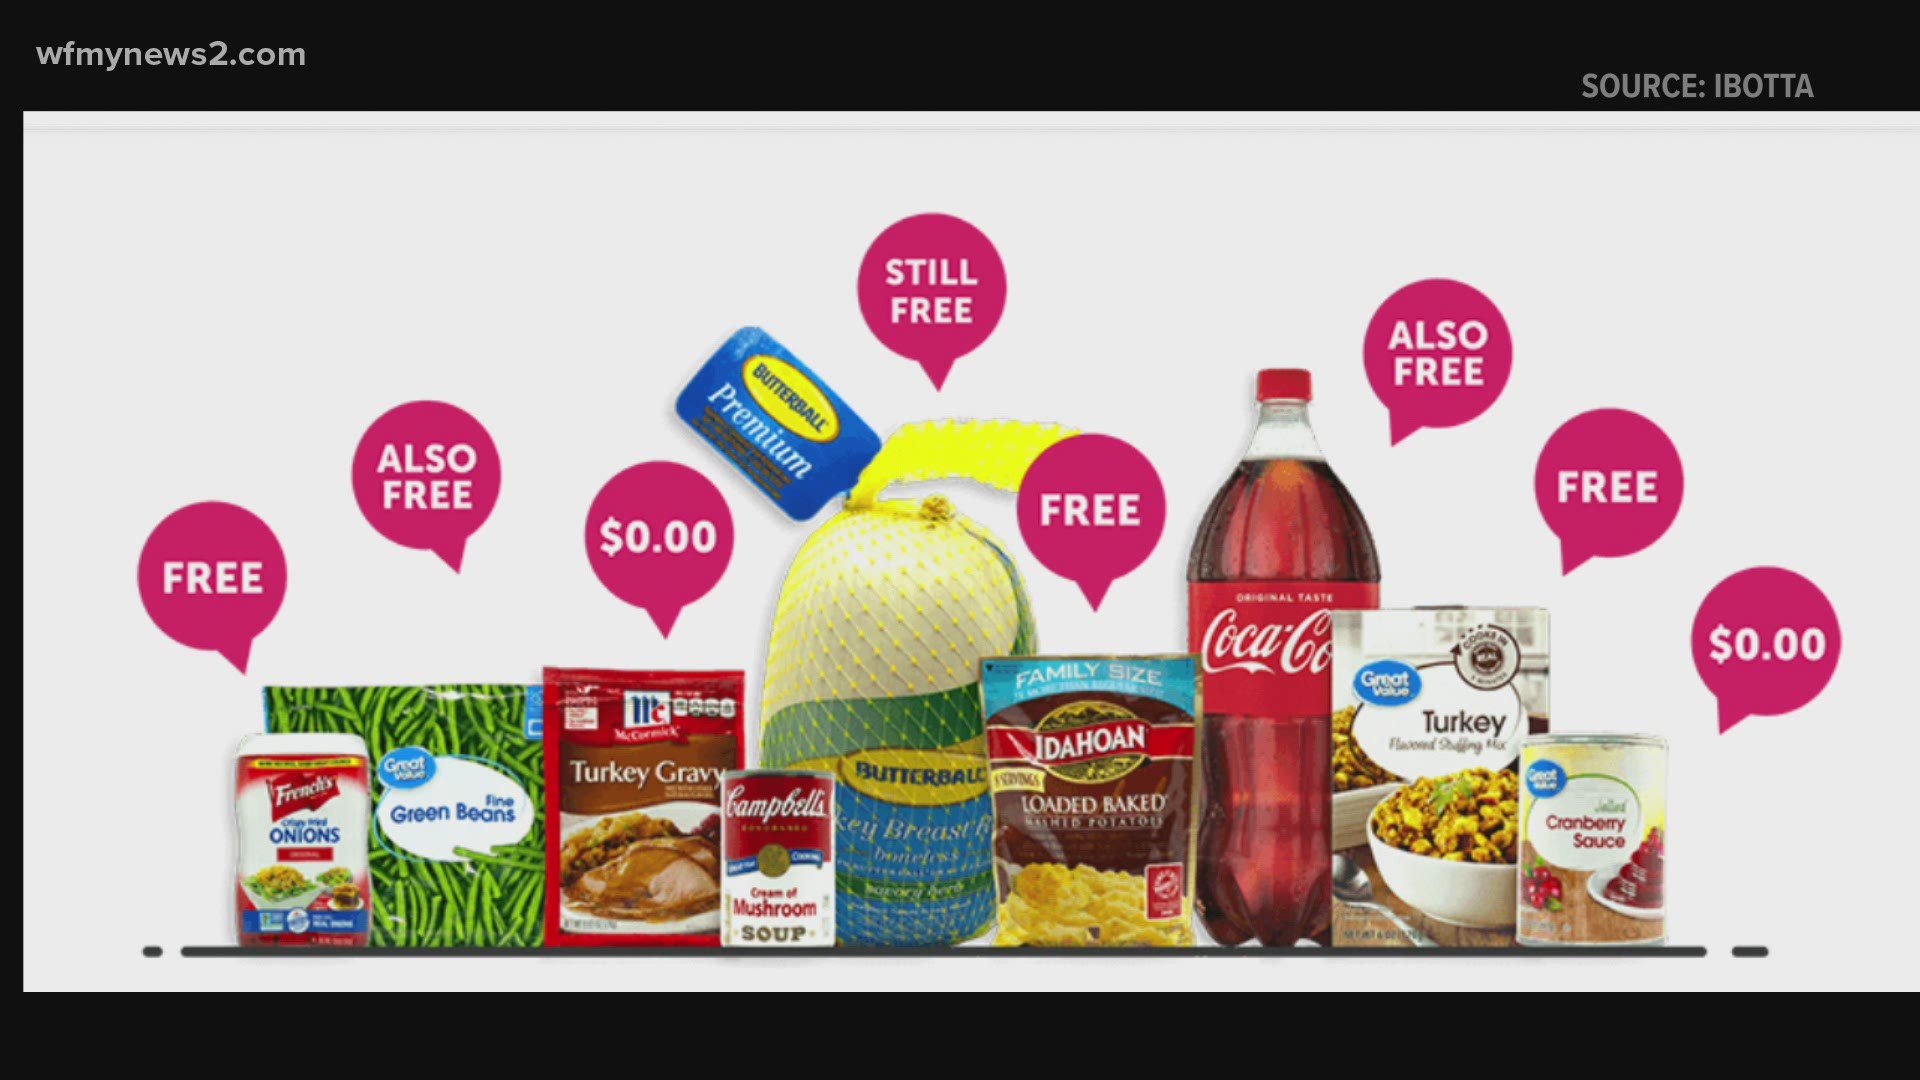 Ibotta has partnered with Walmart and several other companies to offer everything you need for a Thanksgiving dinner. But is it really free?